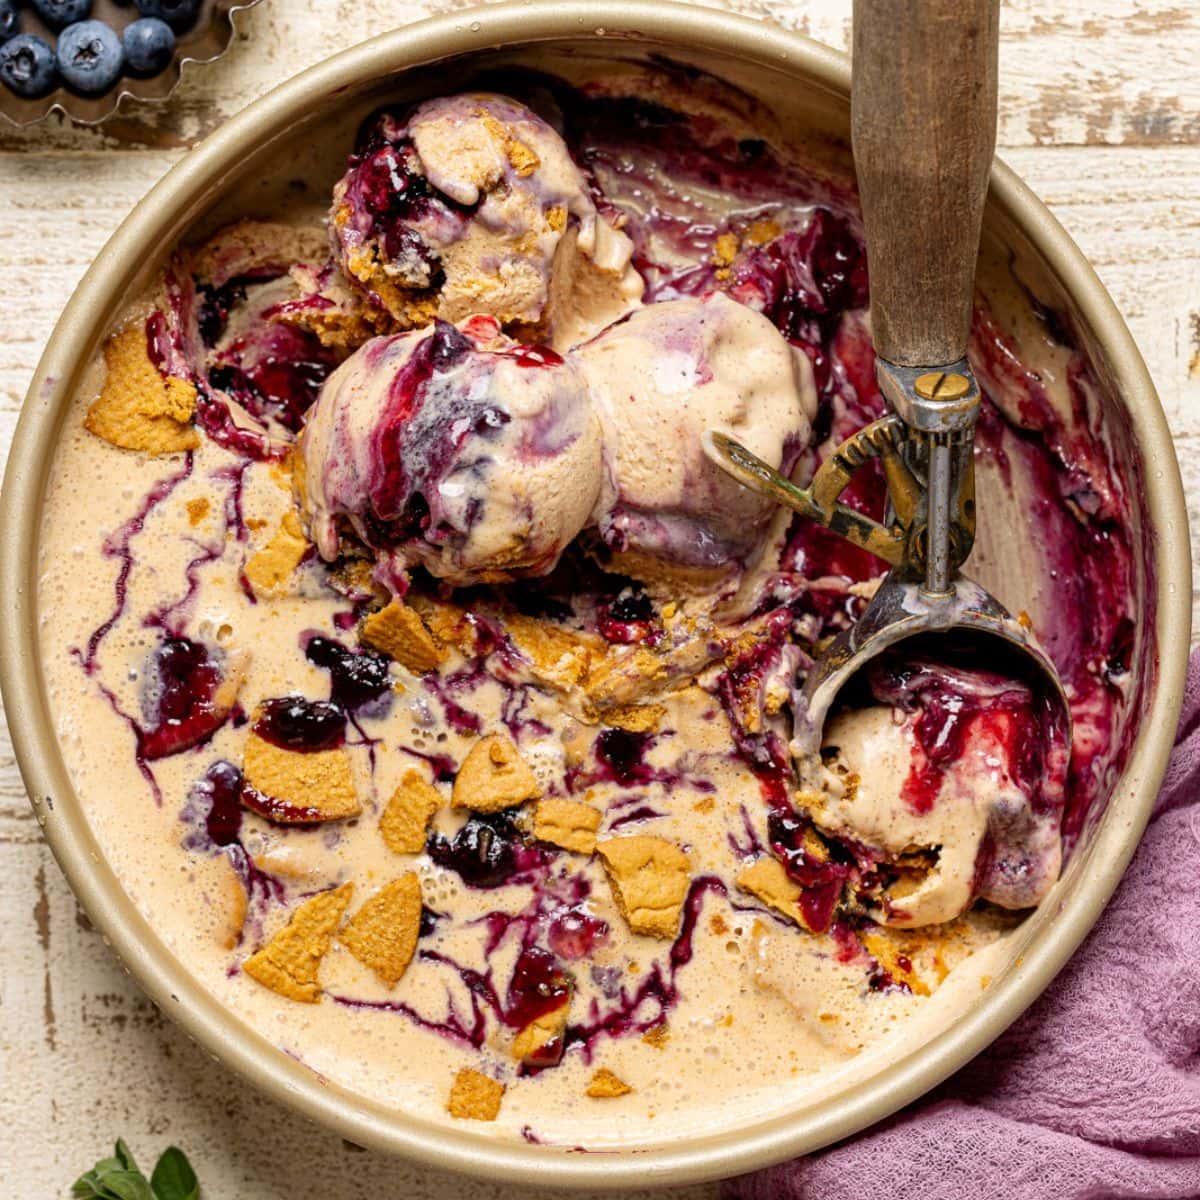 Scoops of ice cream in a round pan with a scoop and blueberries.